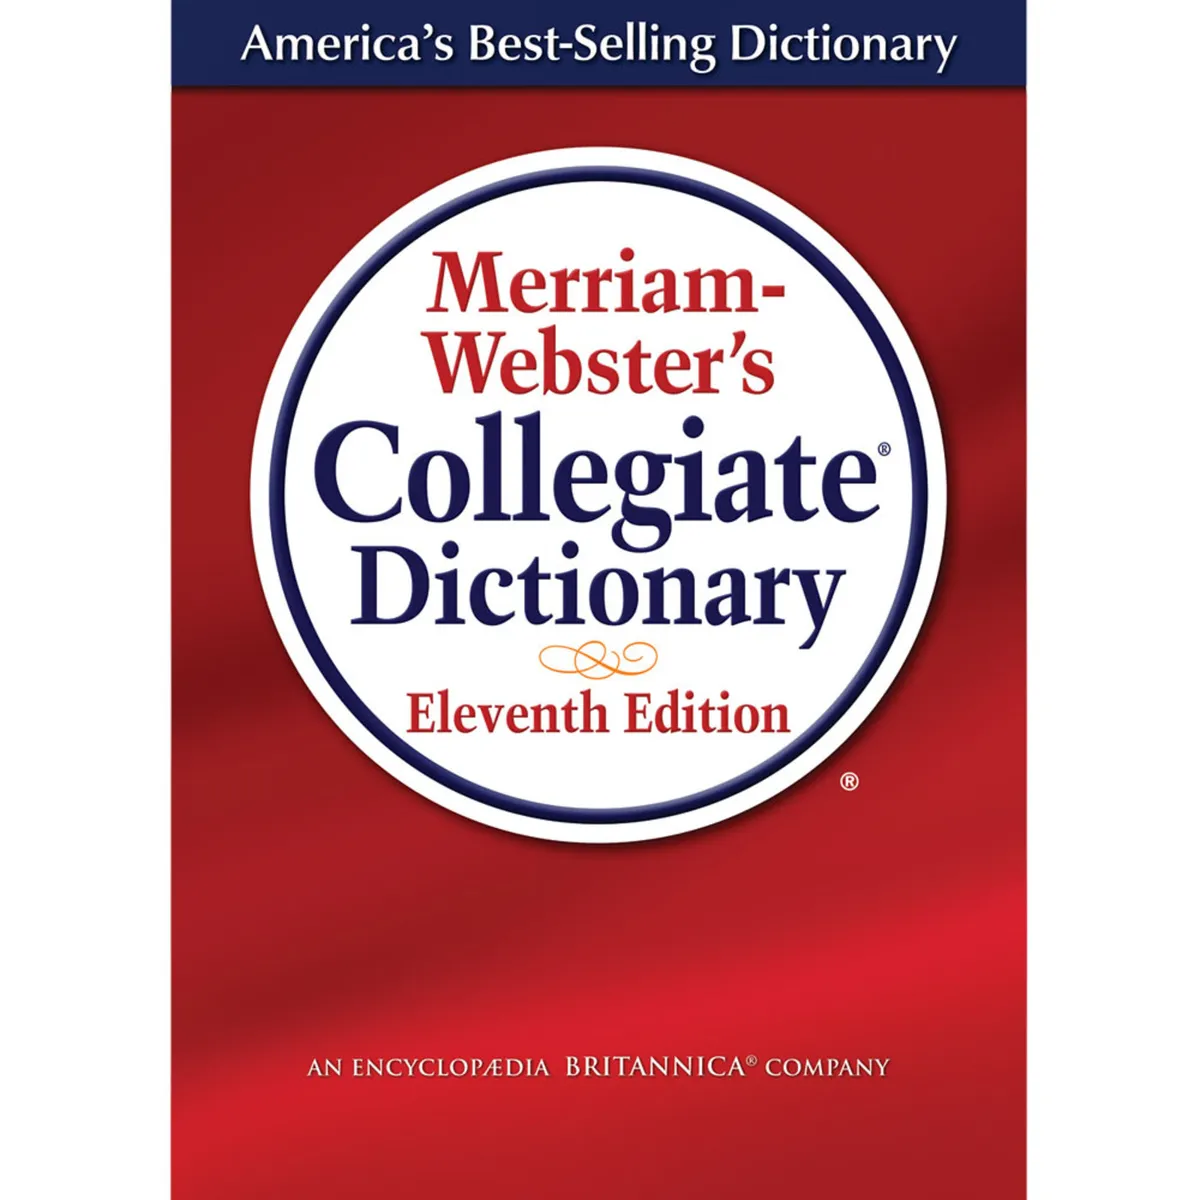 Merriam-Webster’s Collegiate Dictionary 11th Edition